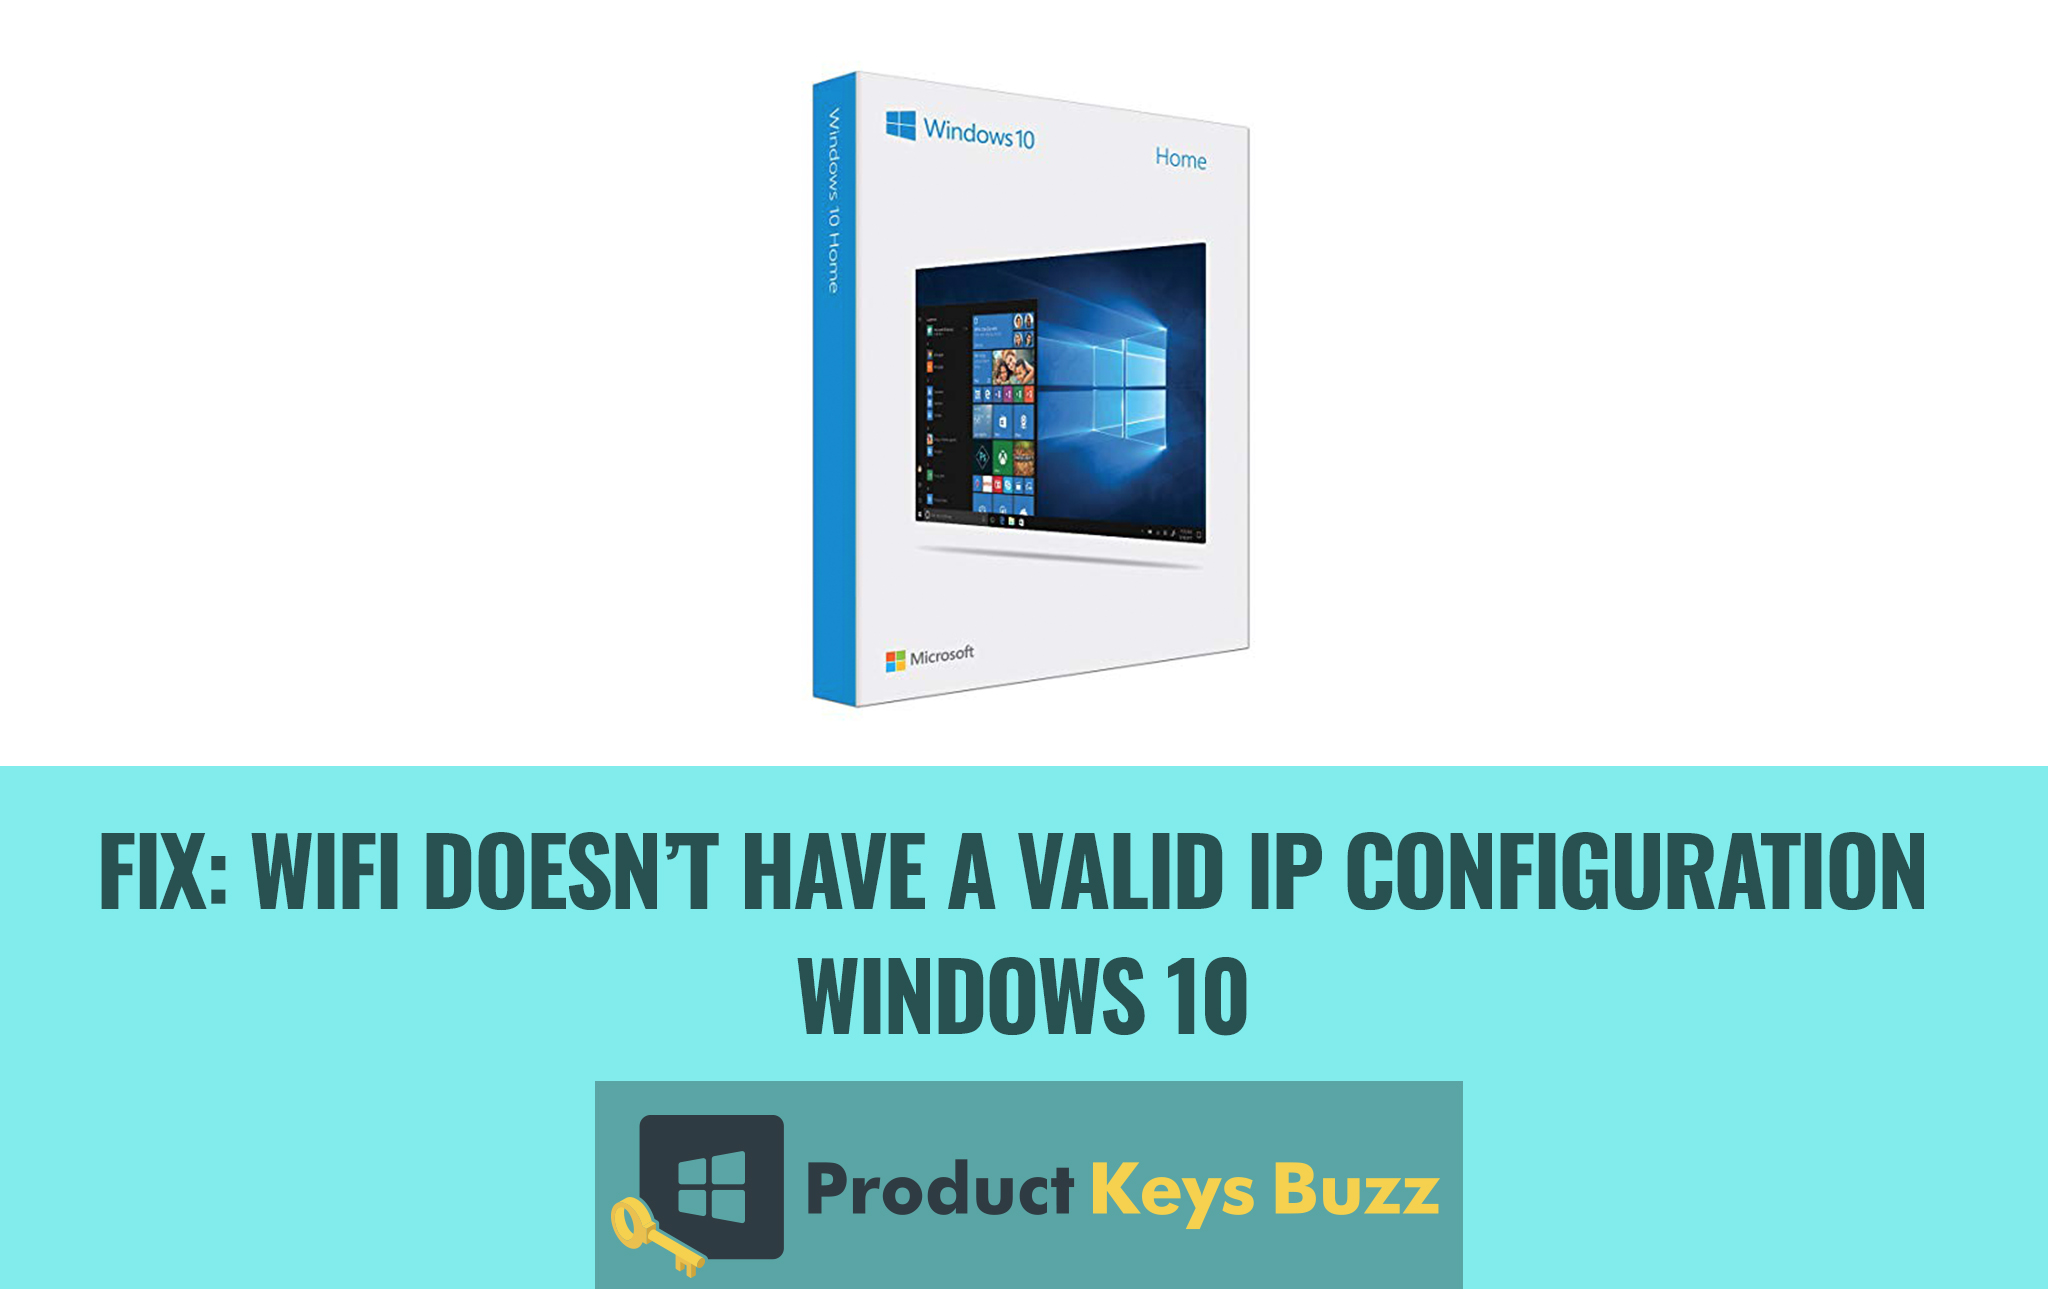 Fix Wifi doesn’t have a valid IP configuration windows 10